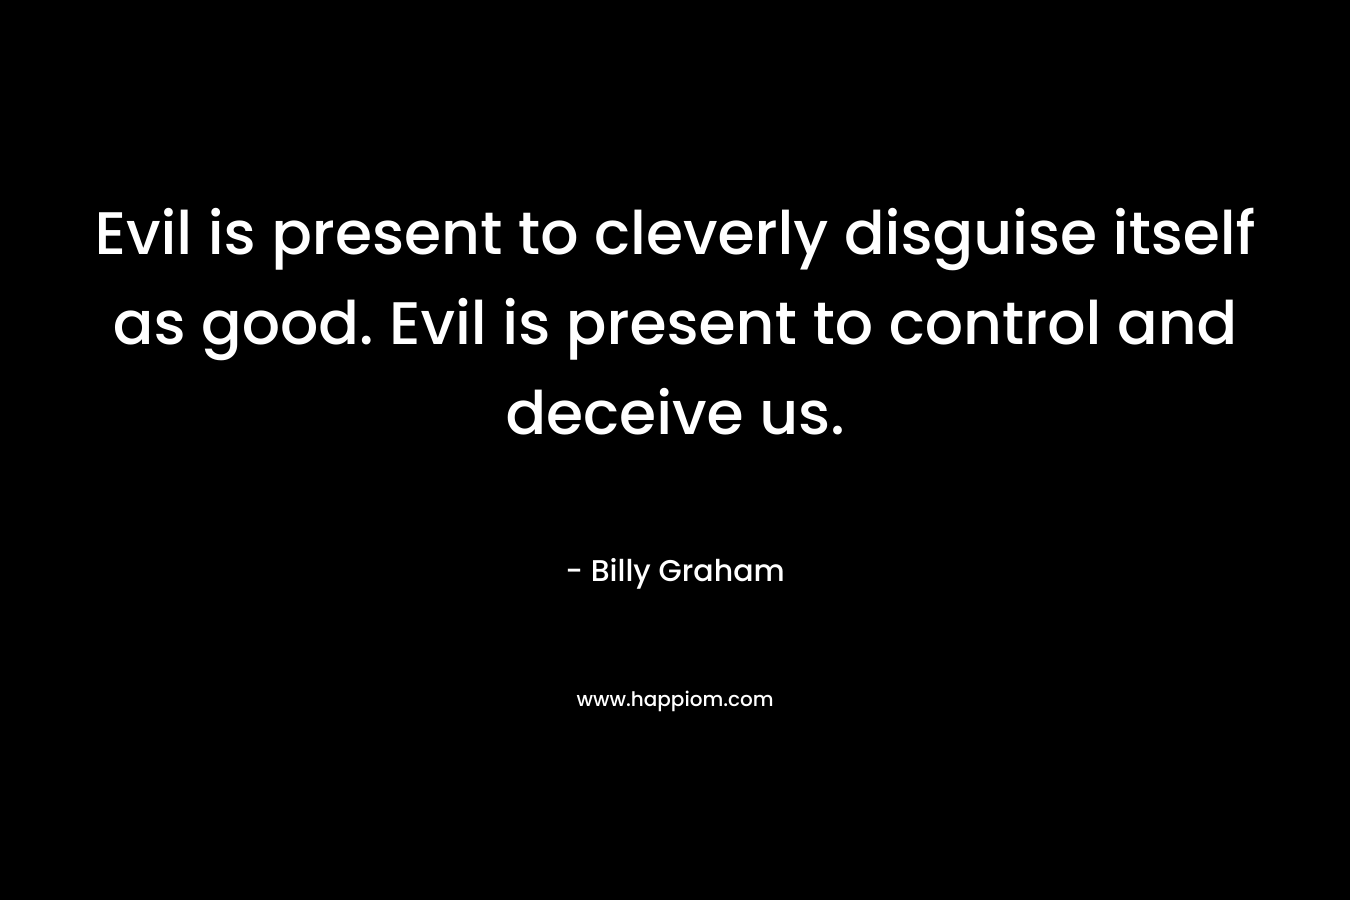 Evil is present to cleverly disguise itself as good. Evil is present to control and deceive us.